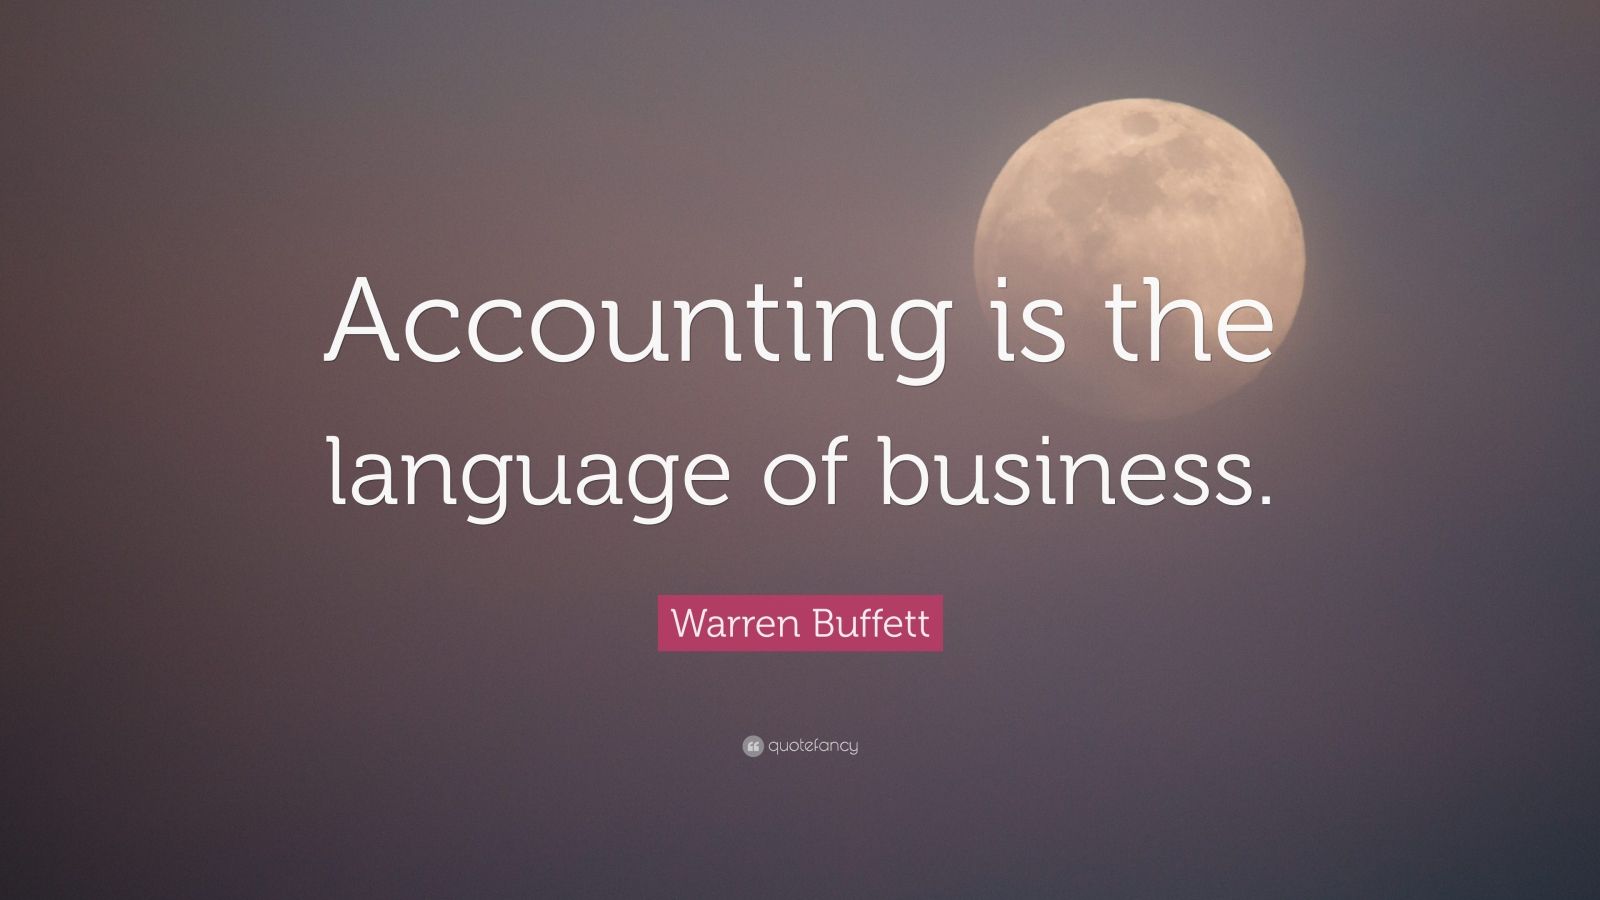 Warren Buffett Quote: “Accounting is the language of business.” (17